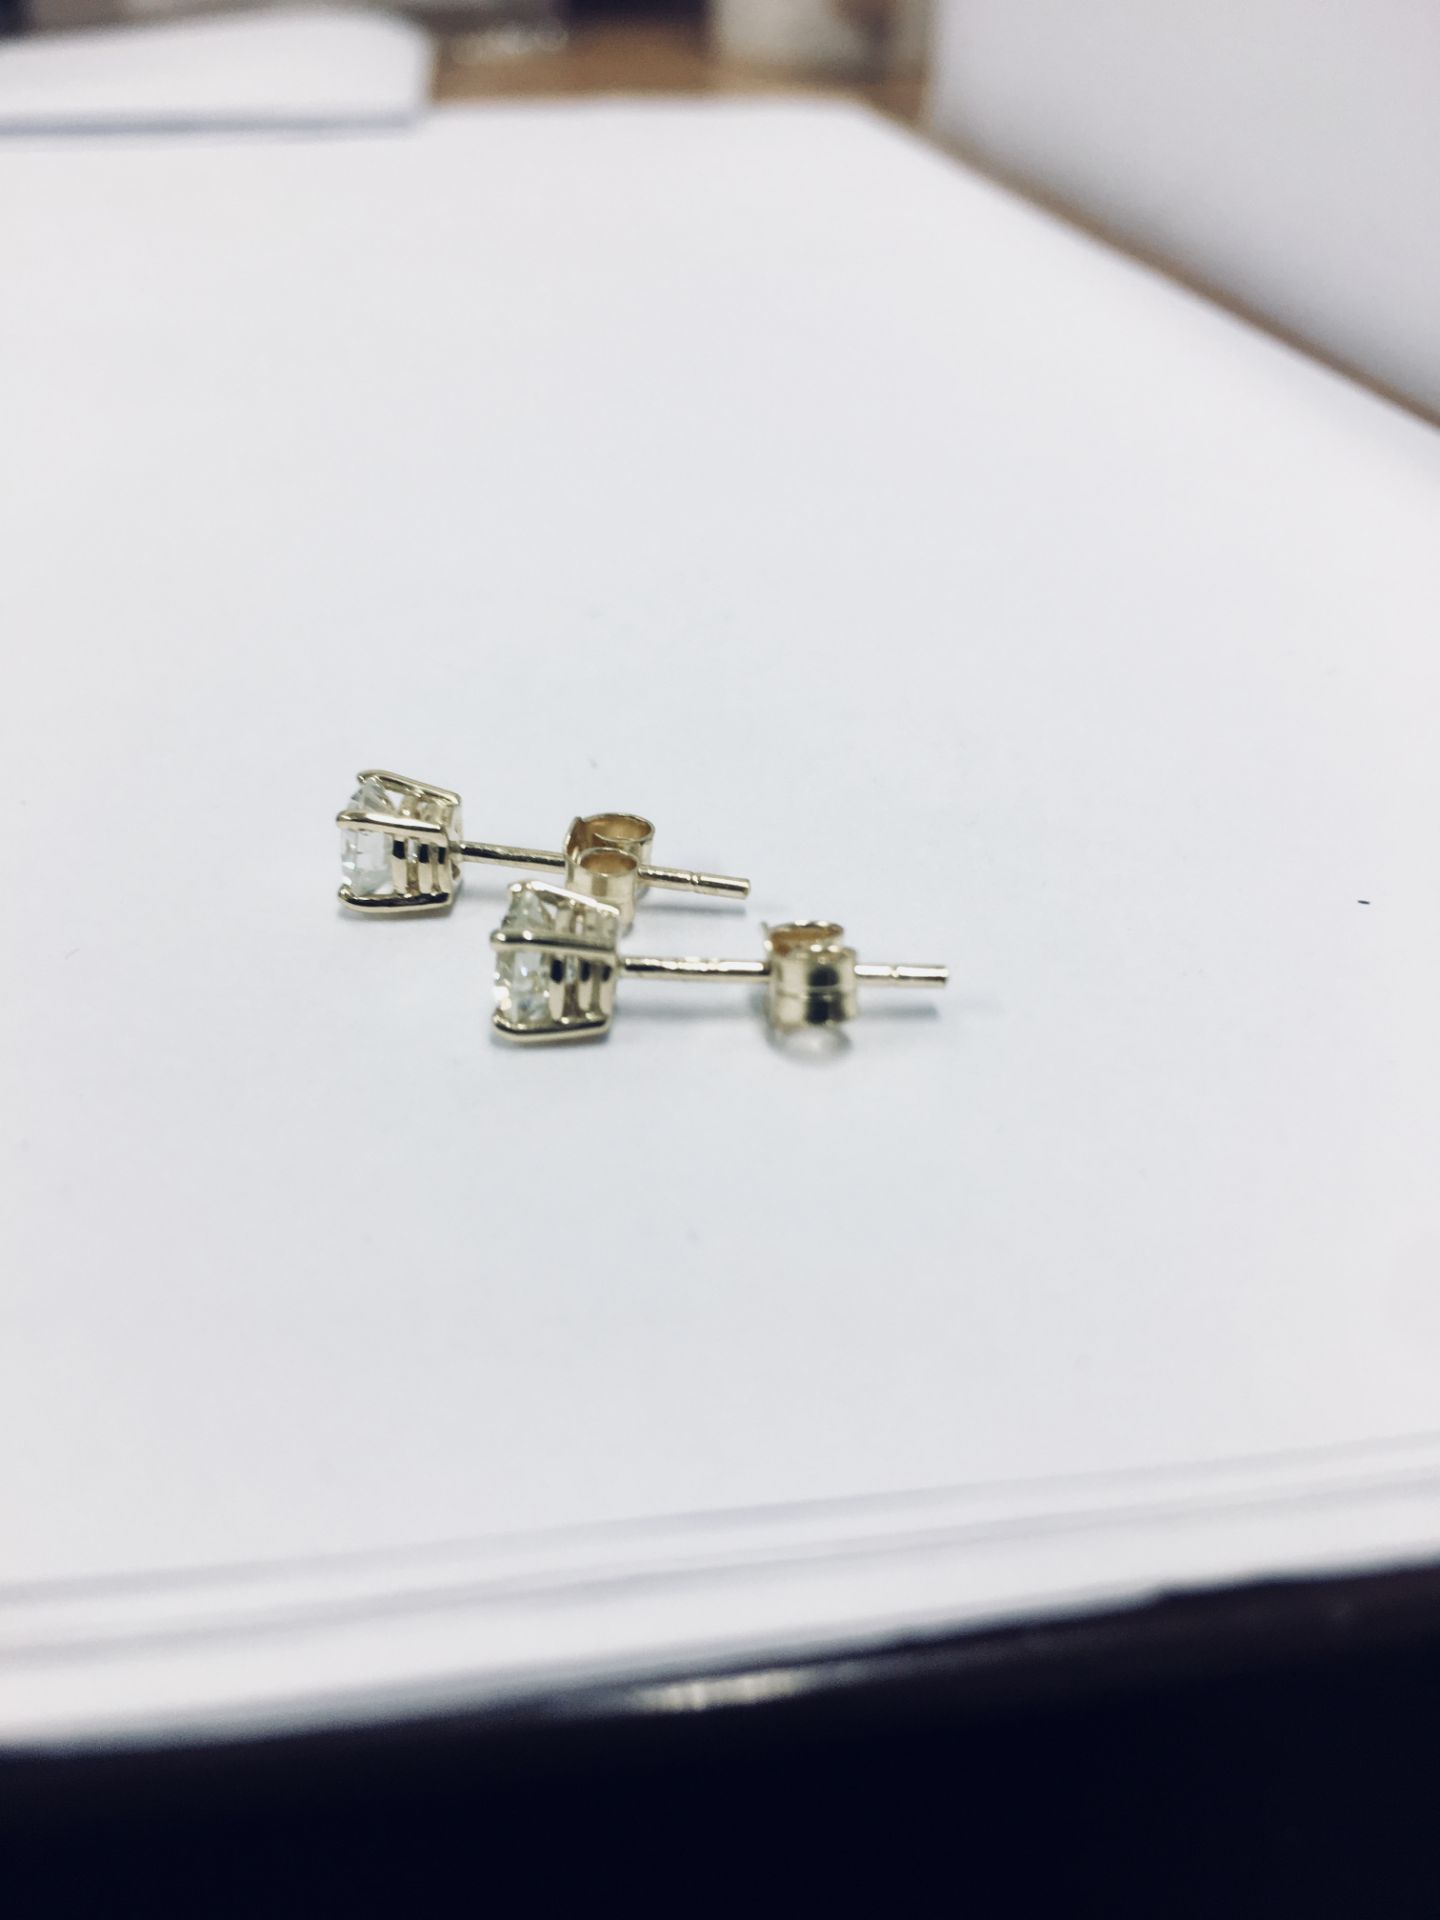 1.00Ct Diamond Solitaire Earrings Set In 18Ct Yellow Gold. - Image 6 of 19